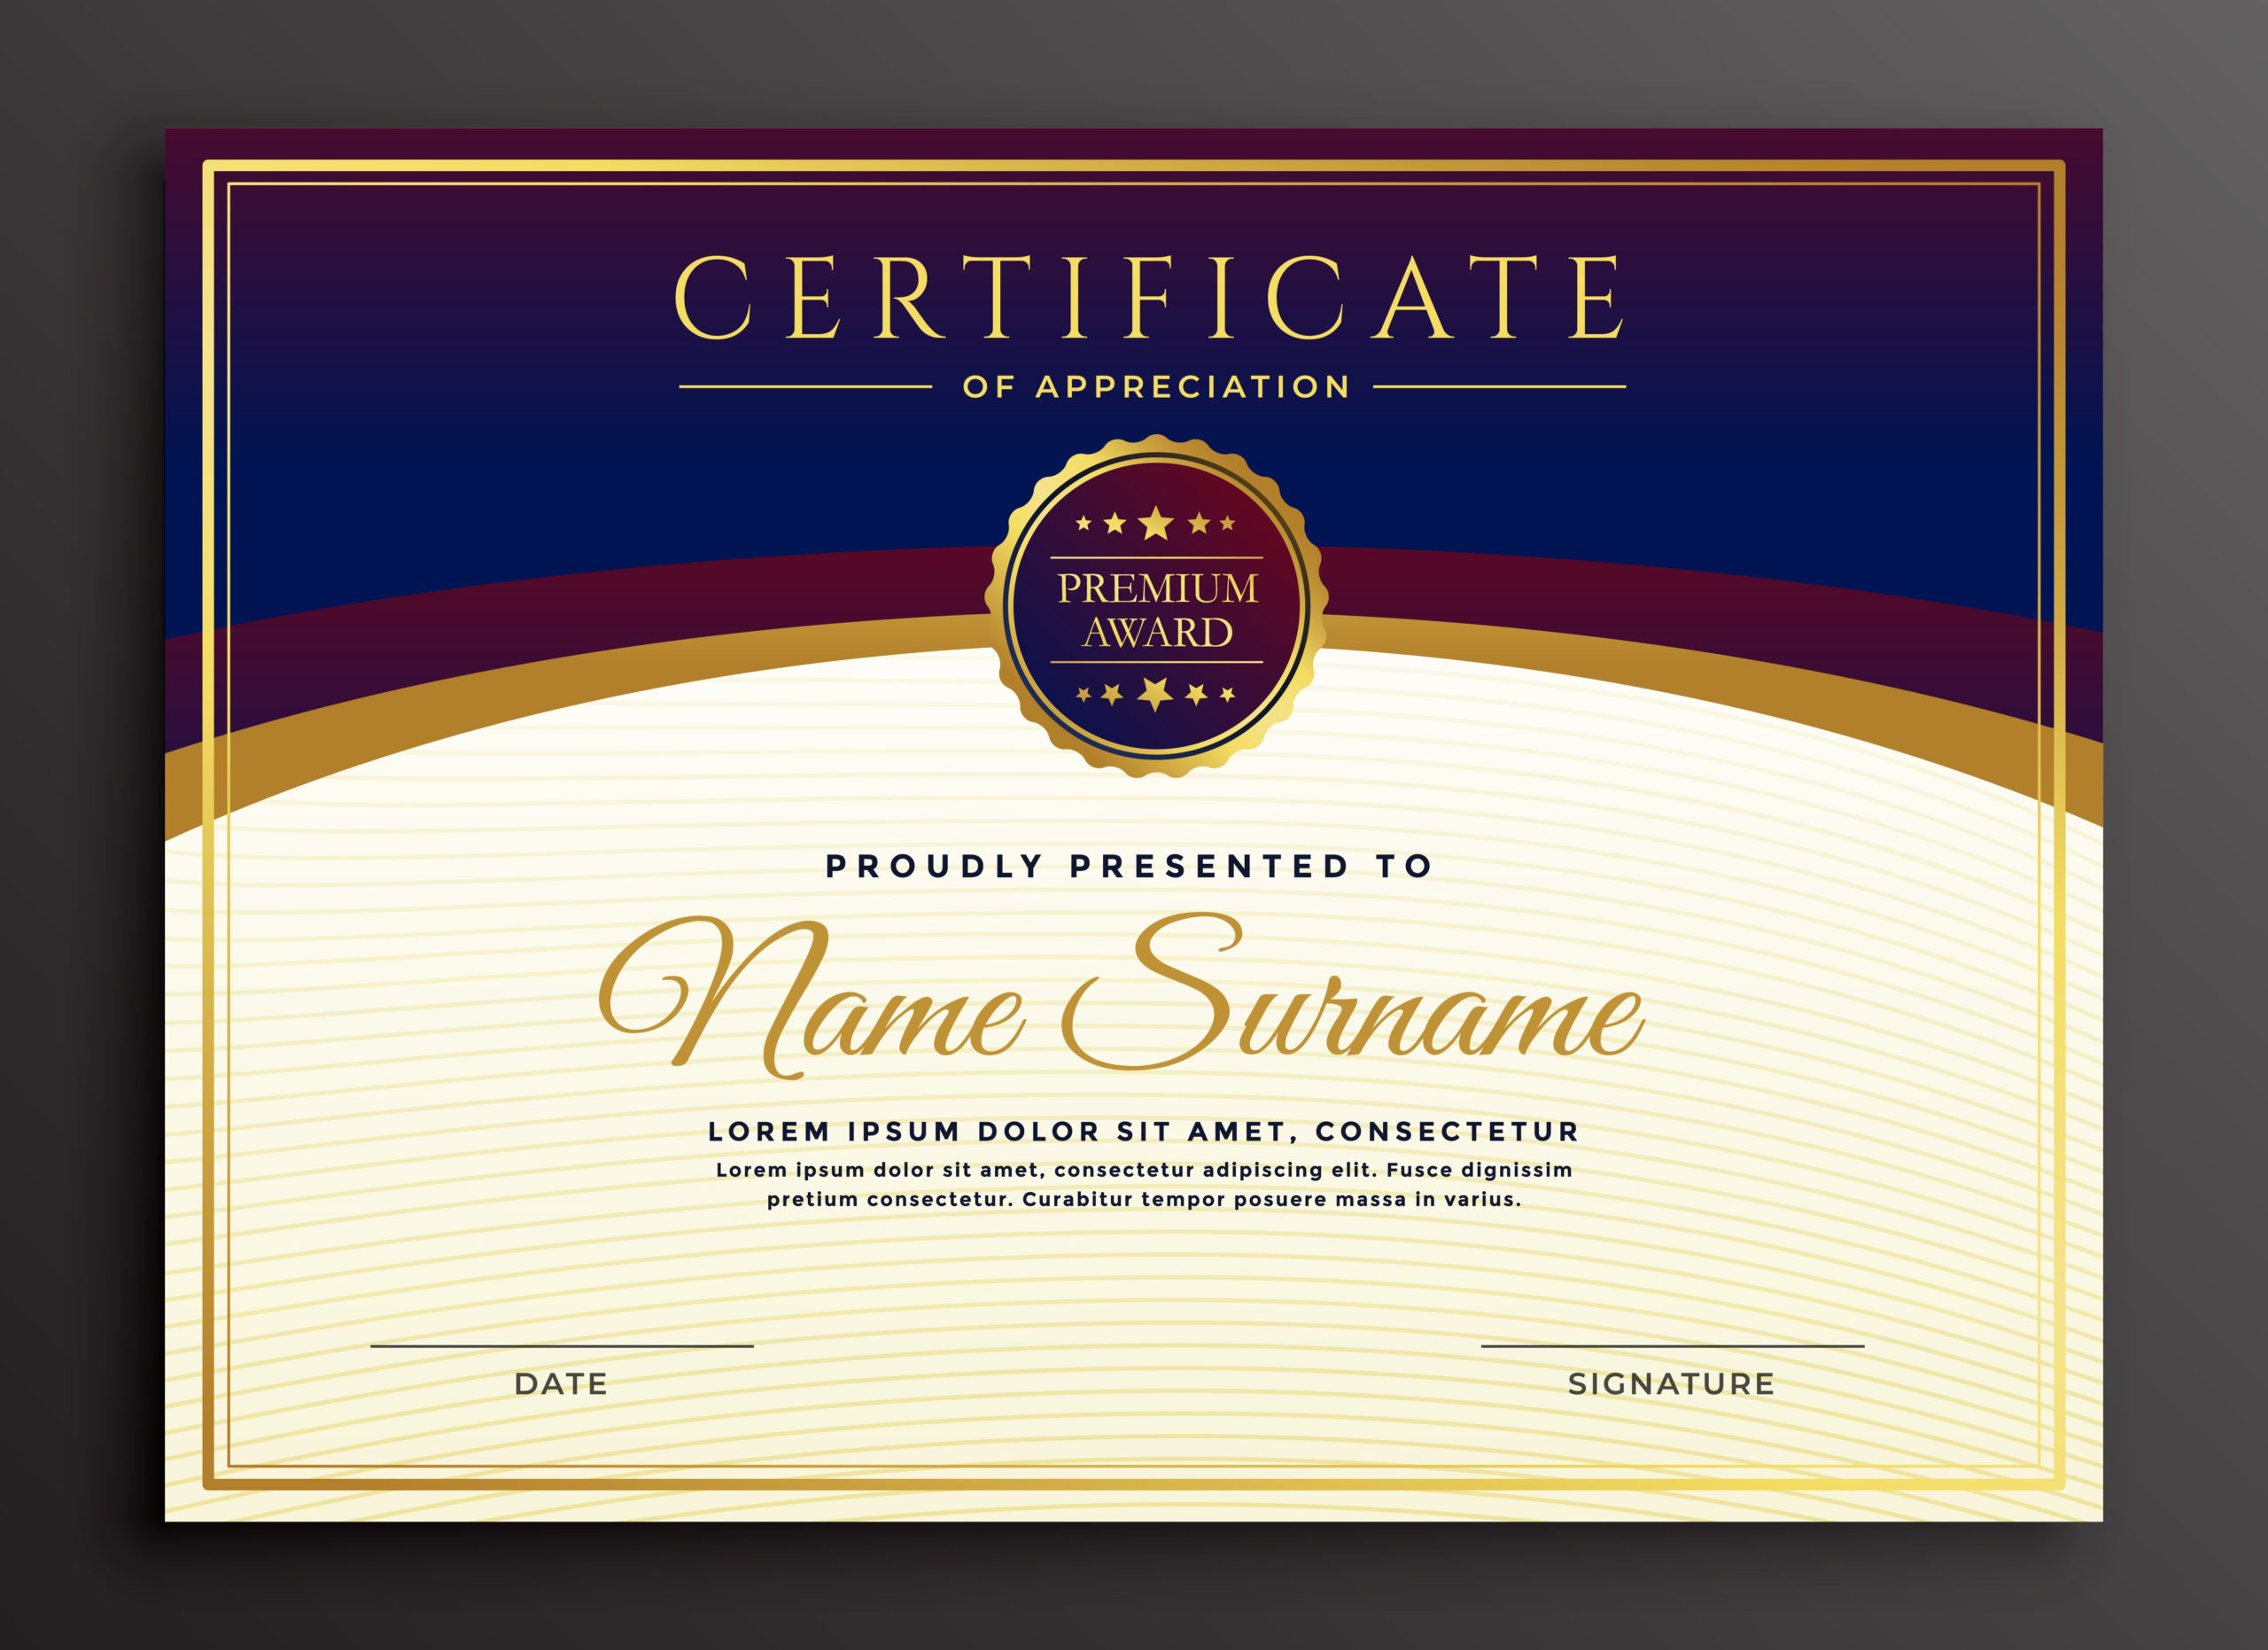 Stylish Certificate Design Professional Template Pertaining To Free Art Certificate Templates